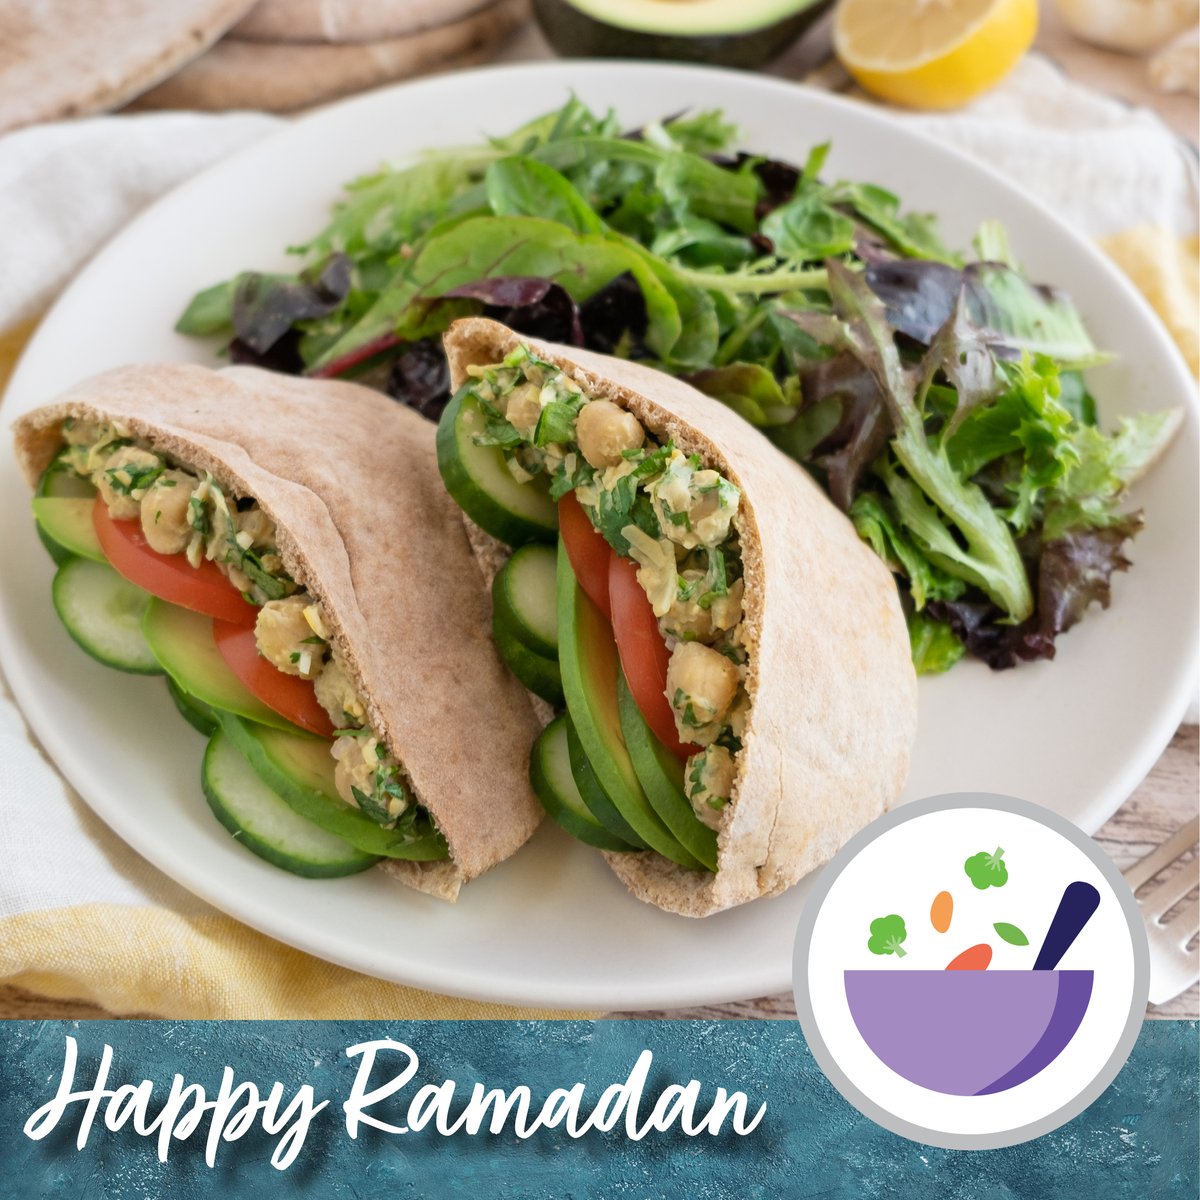 Celebrate Ramadan with delicious recipe inspiration found through Meal Plans on your Shaw’s for U™ mobile app! Give this recipe for Falafel-Inspired Chickpea Salad Pita Pockets a try! 👉 ms.spr.ly/6014cvl6g